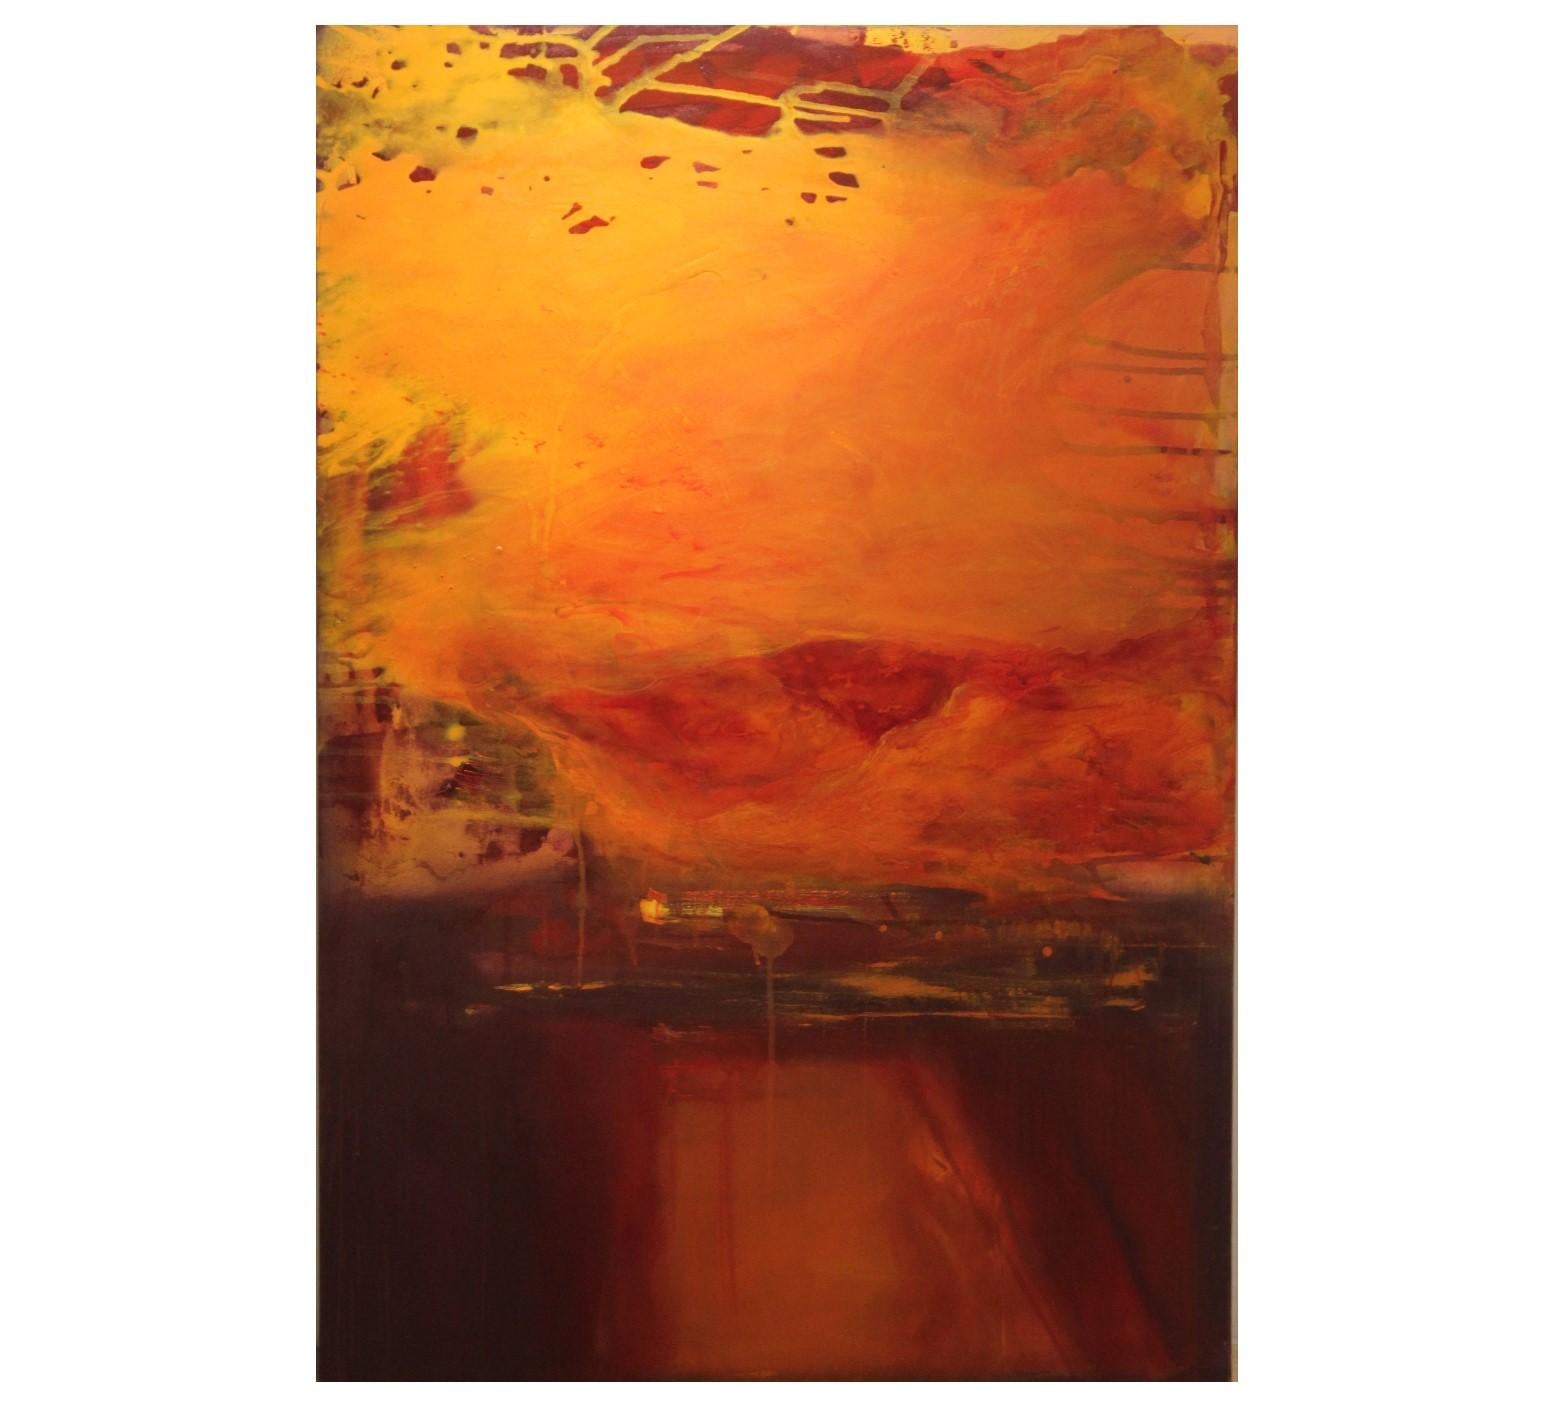 Karen Lastre  Abstract Painting - "Homecoming of a Loving Spirit" Abstract Expressionist Inspired by Mark Rothko